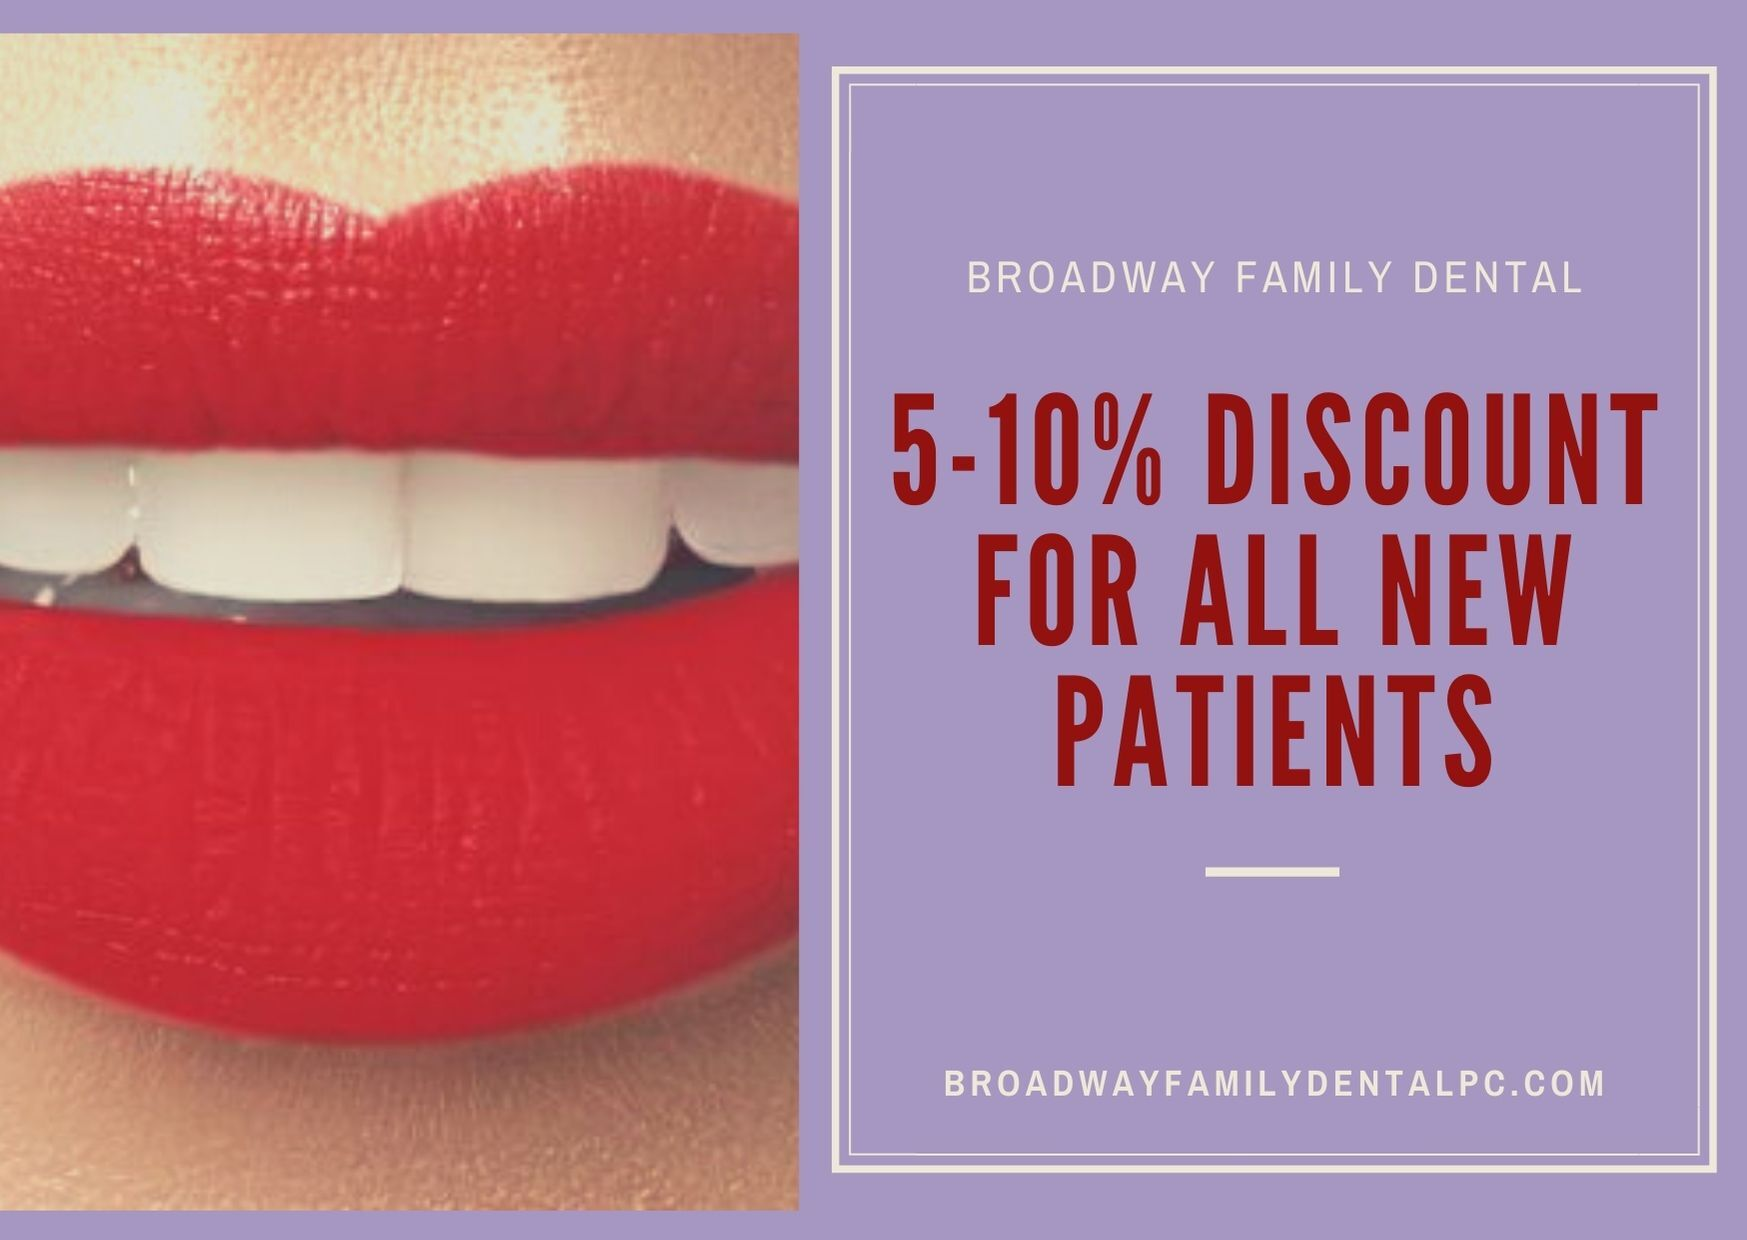 Broadway Family Dental offers a discount'